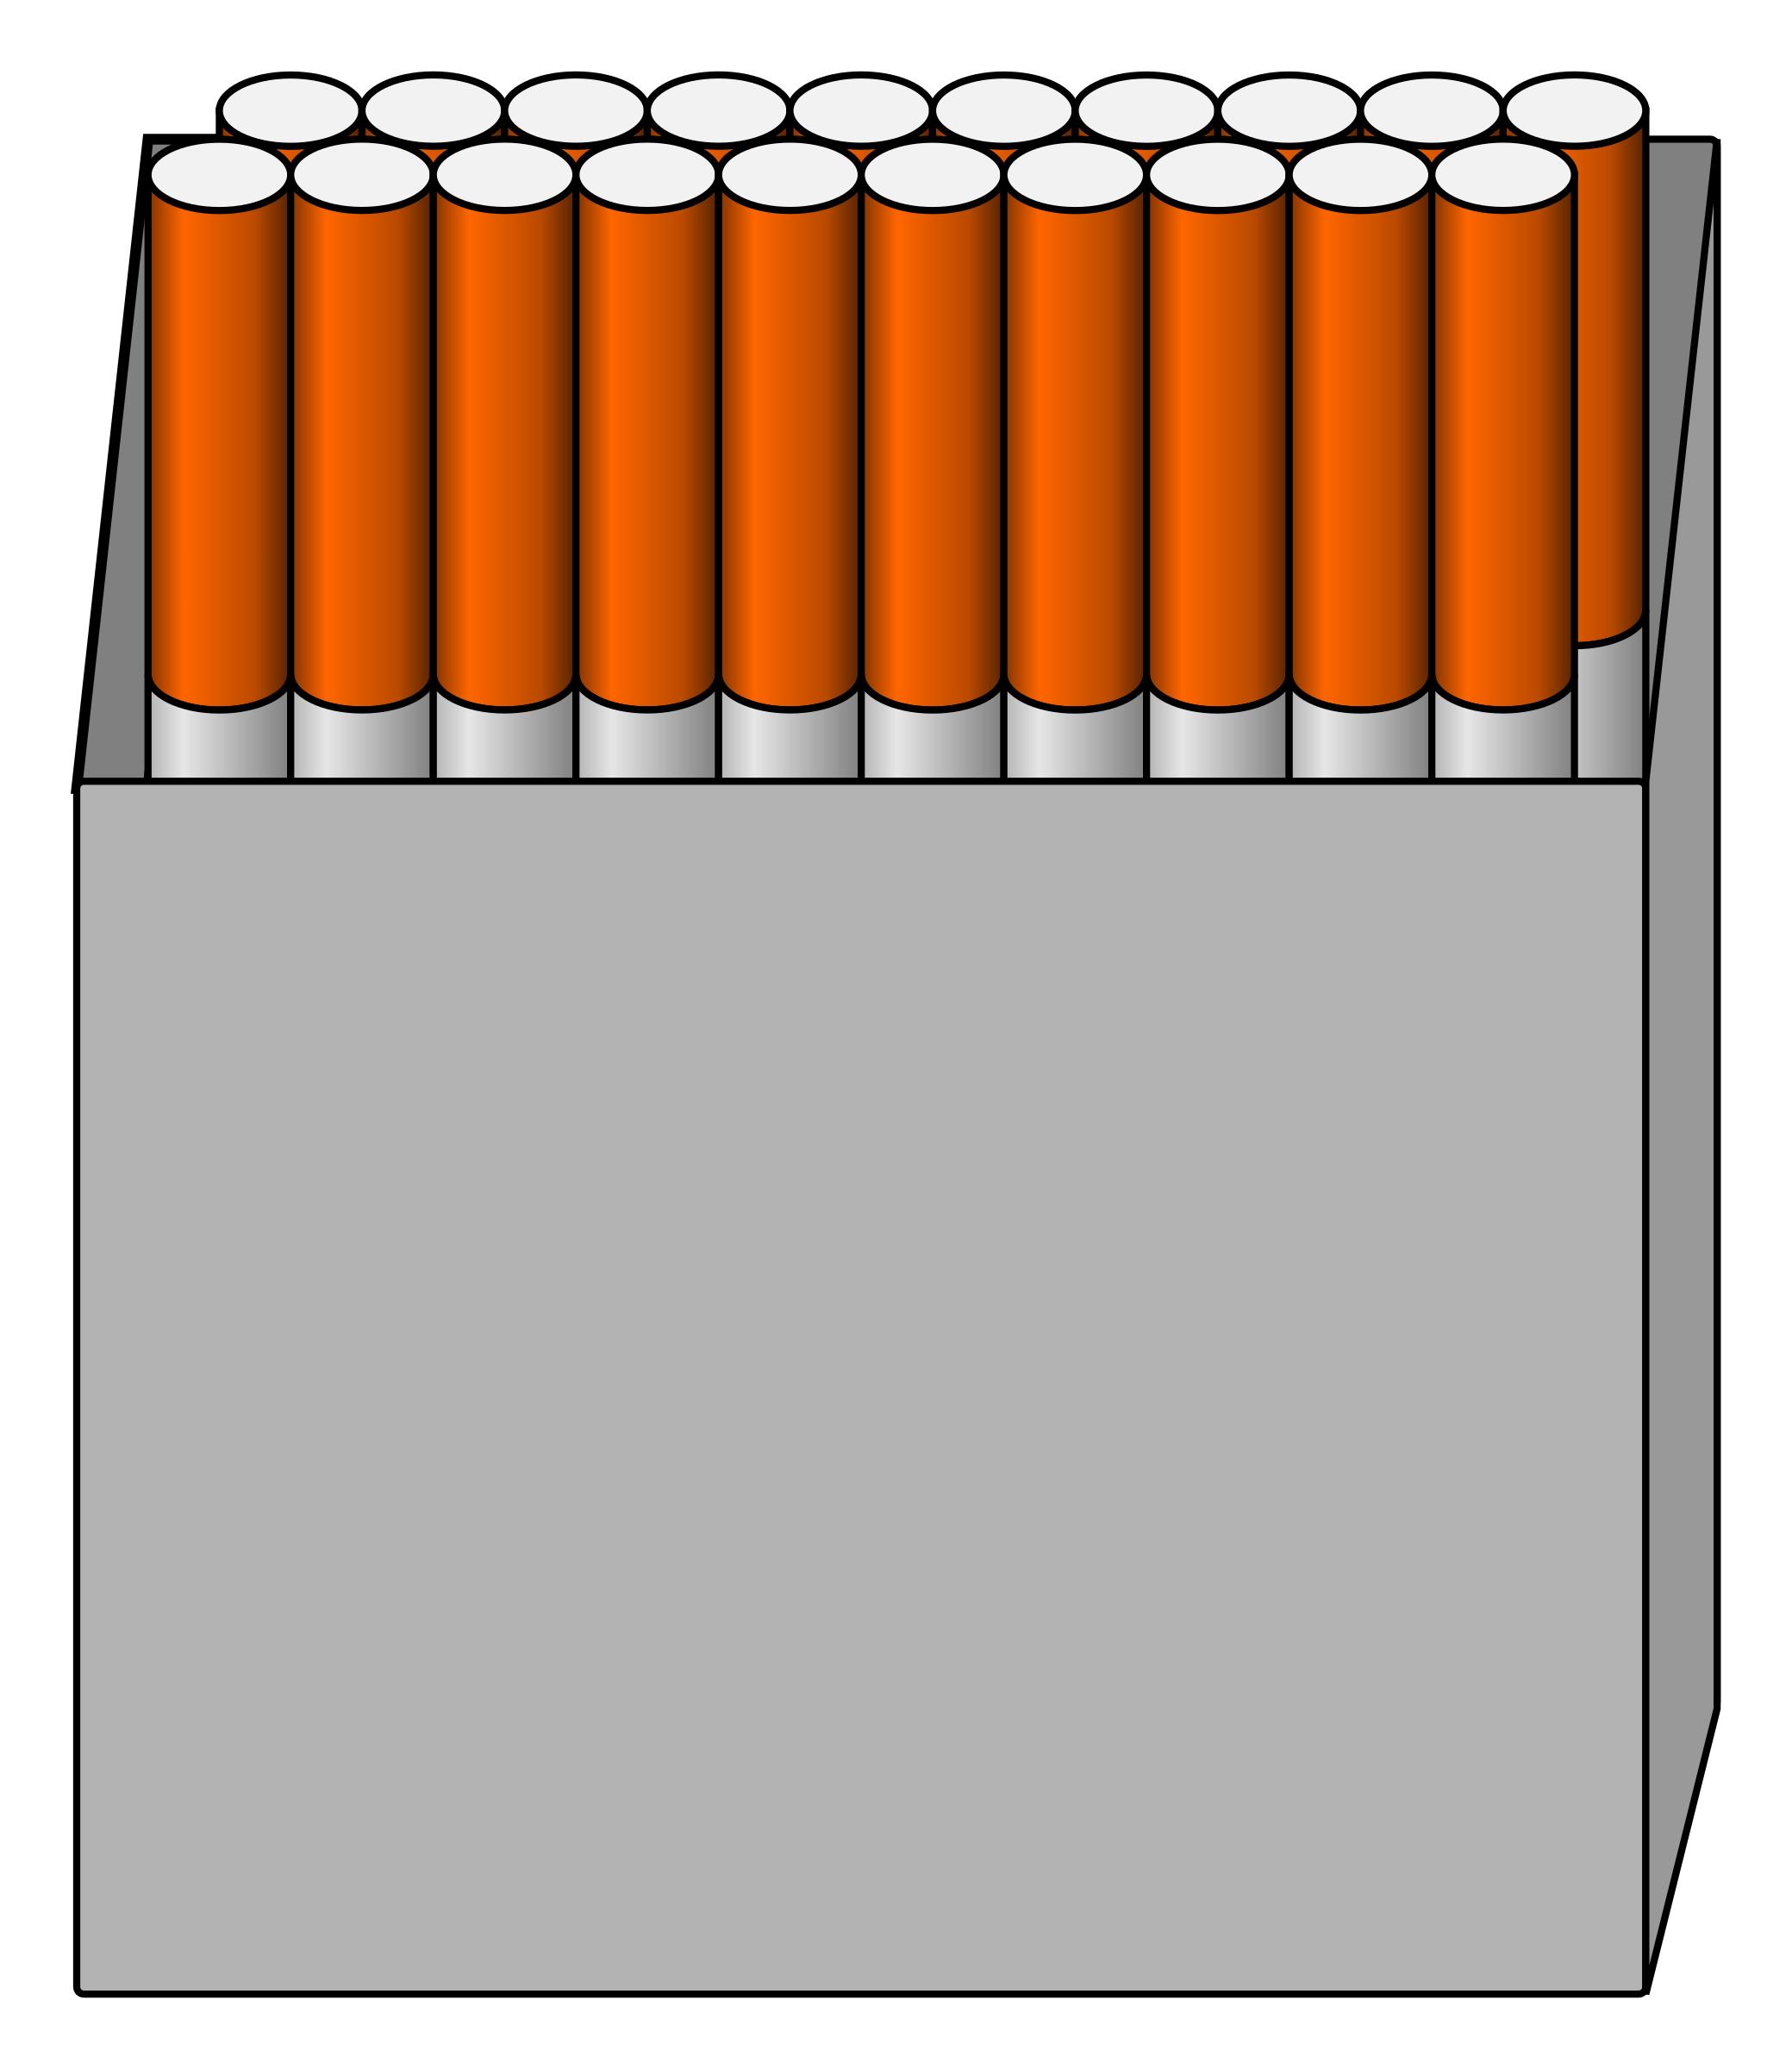 Box of 20 cigarettes png